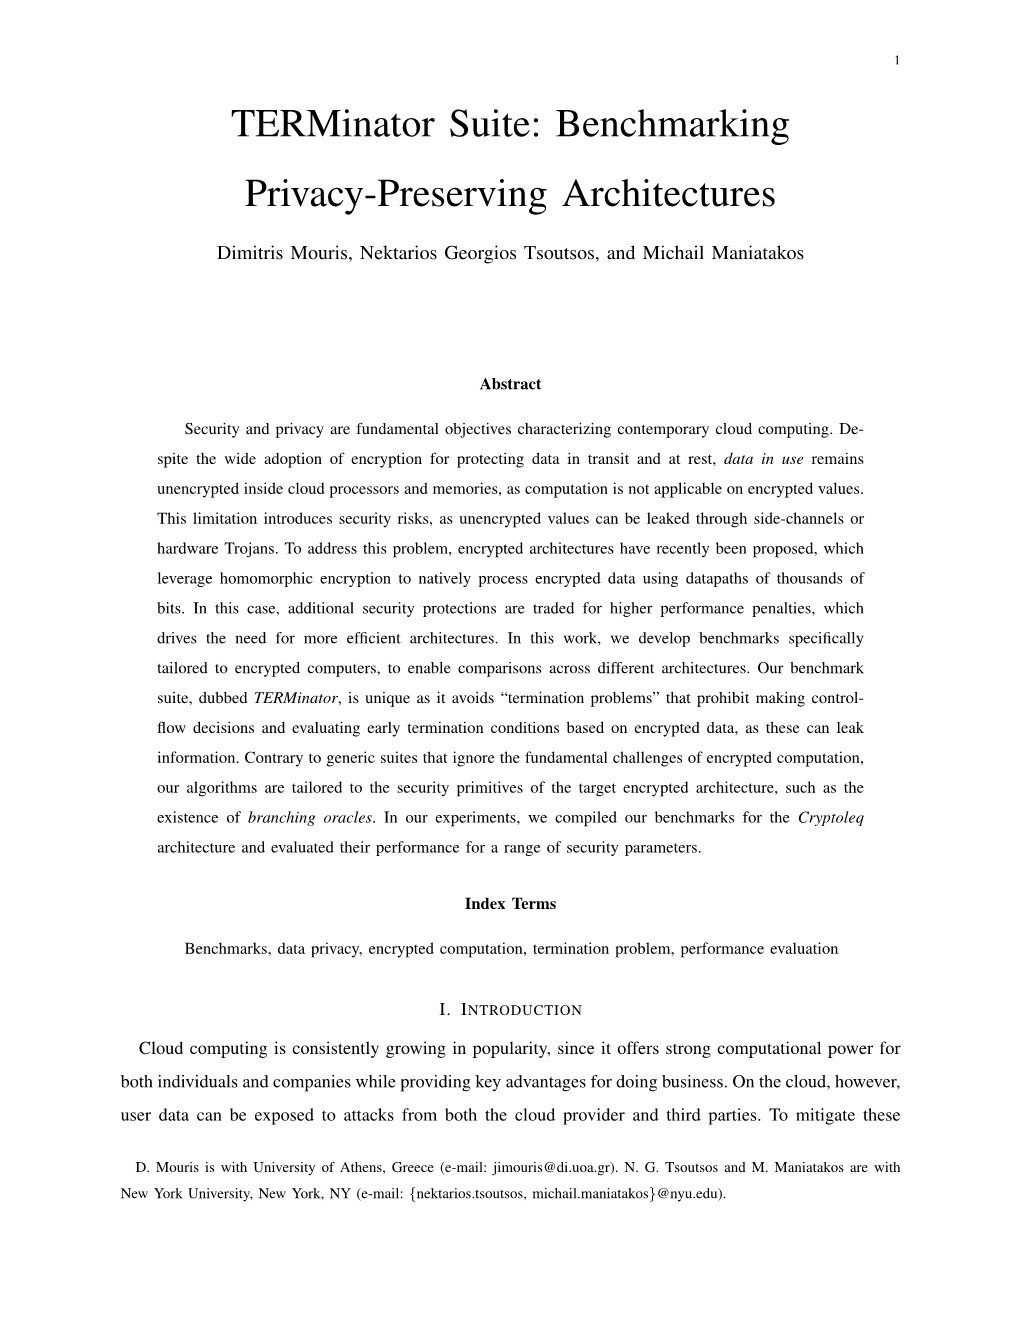 Terminator Suite: Benchmarking Privacy-Preserving Architectures